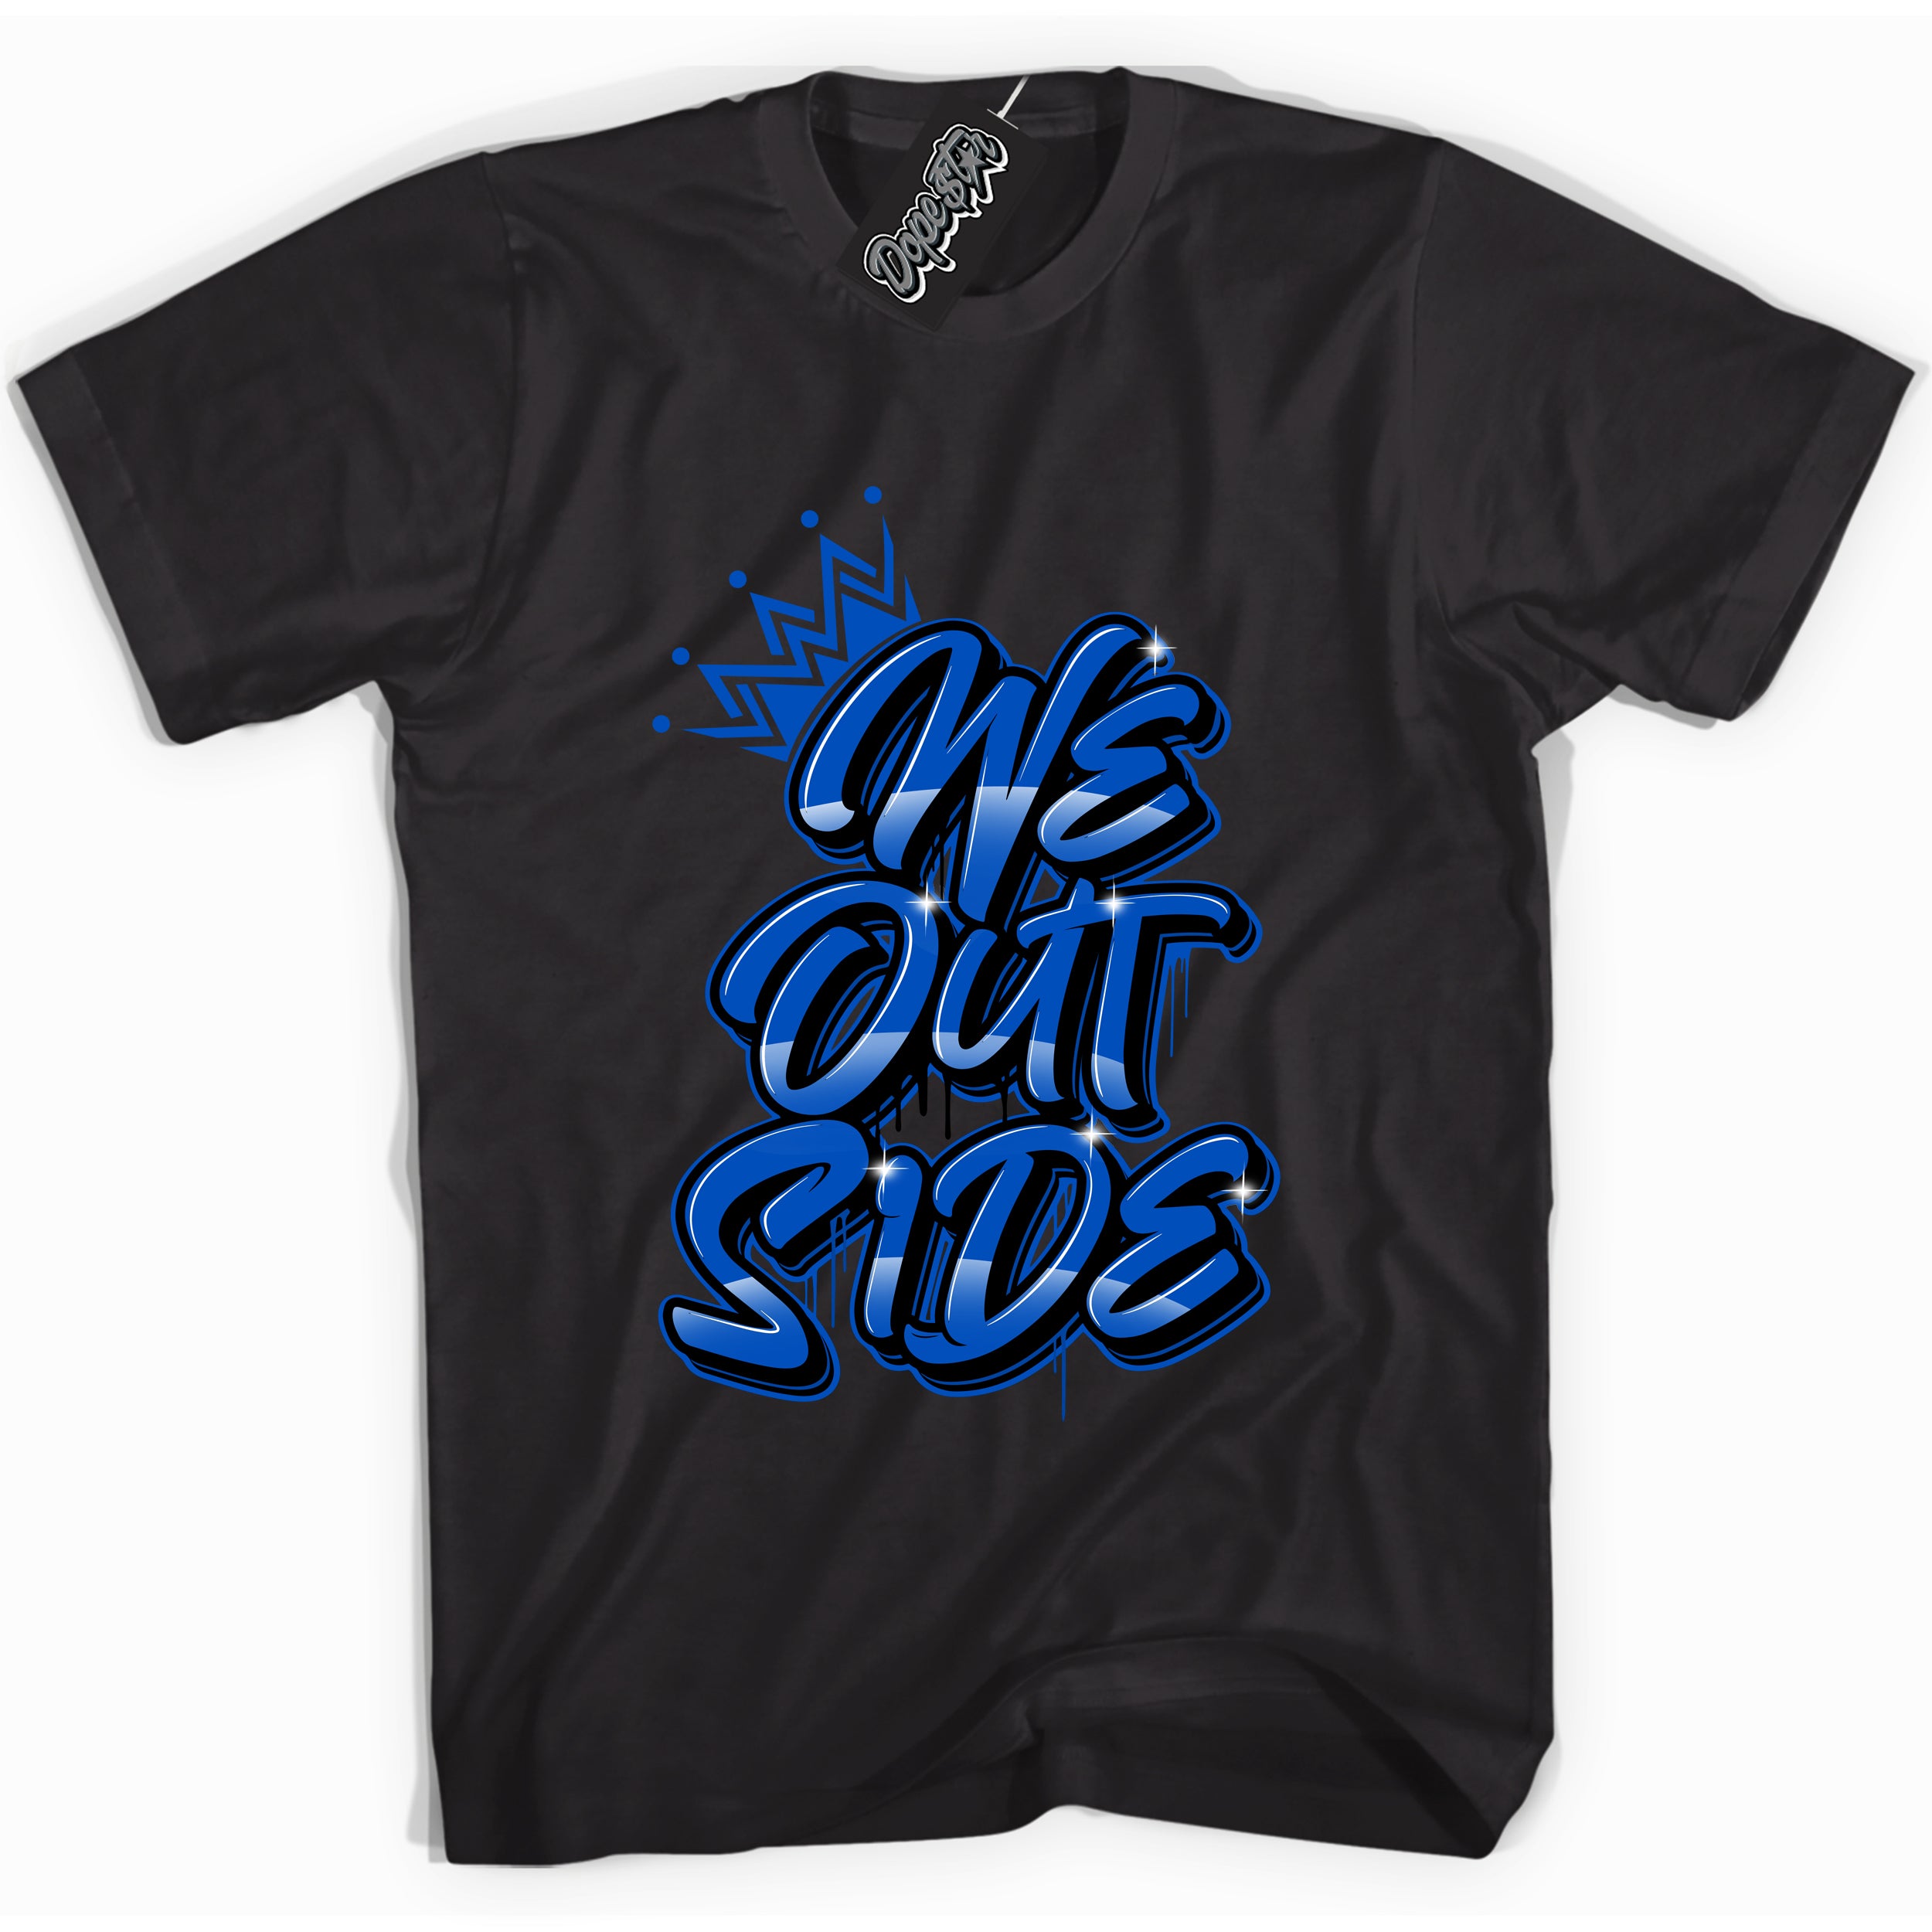 Cool Black graphic tee with "We Outside" design, that perfectly matches Royal Reimagined 1s sneakers 